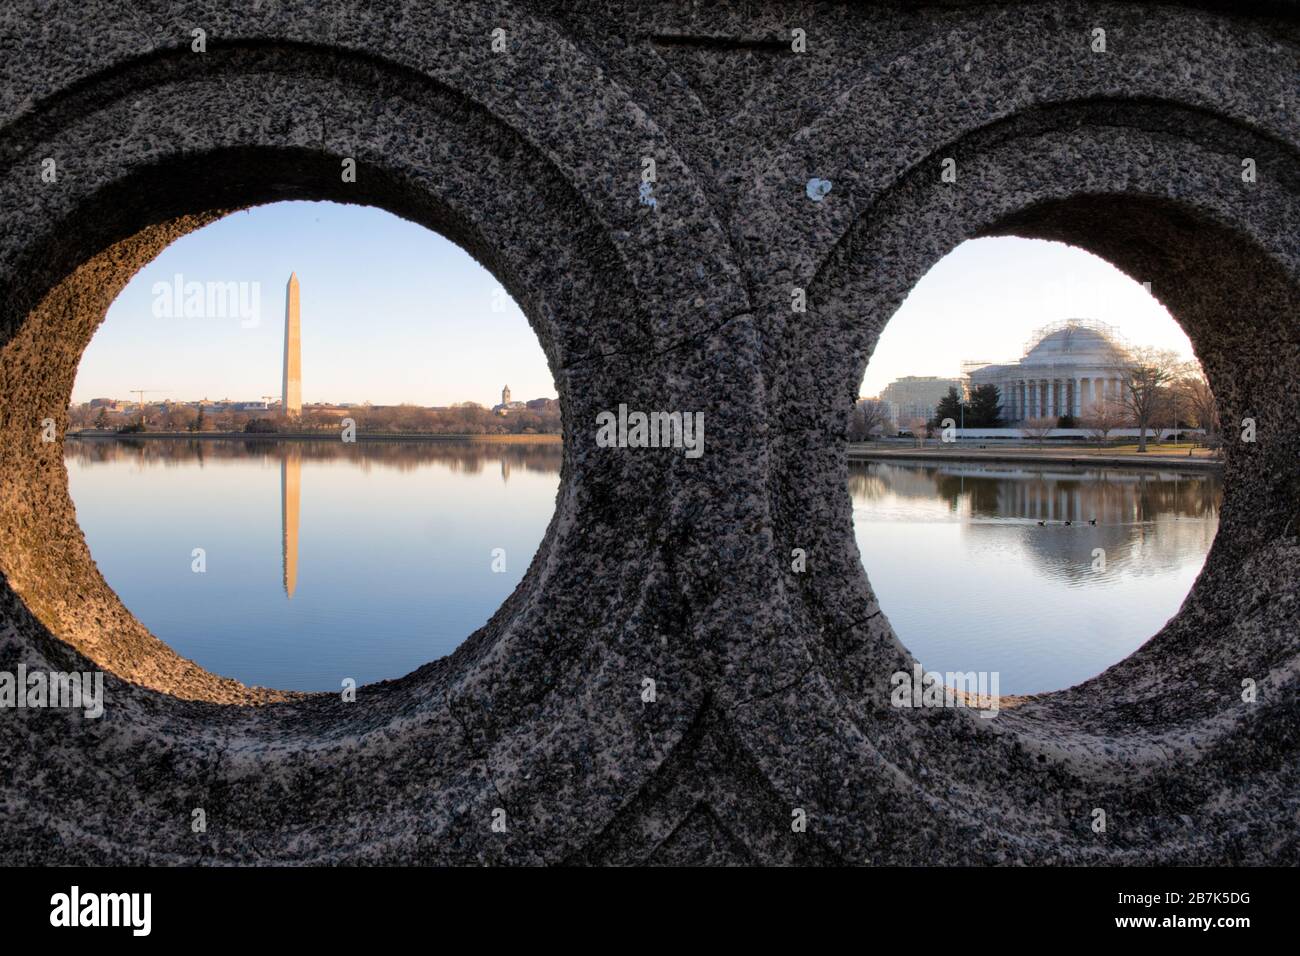 WASHINGTON, DC - The Washington Monument (left) and the Jefferson Memorial (right) framed through round portals on a small stone bridge over the Tidal Basin in Washington DC. Stock Photo